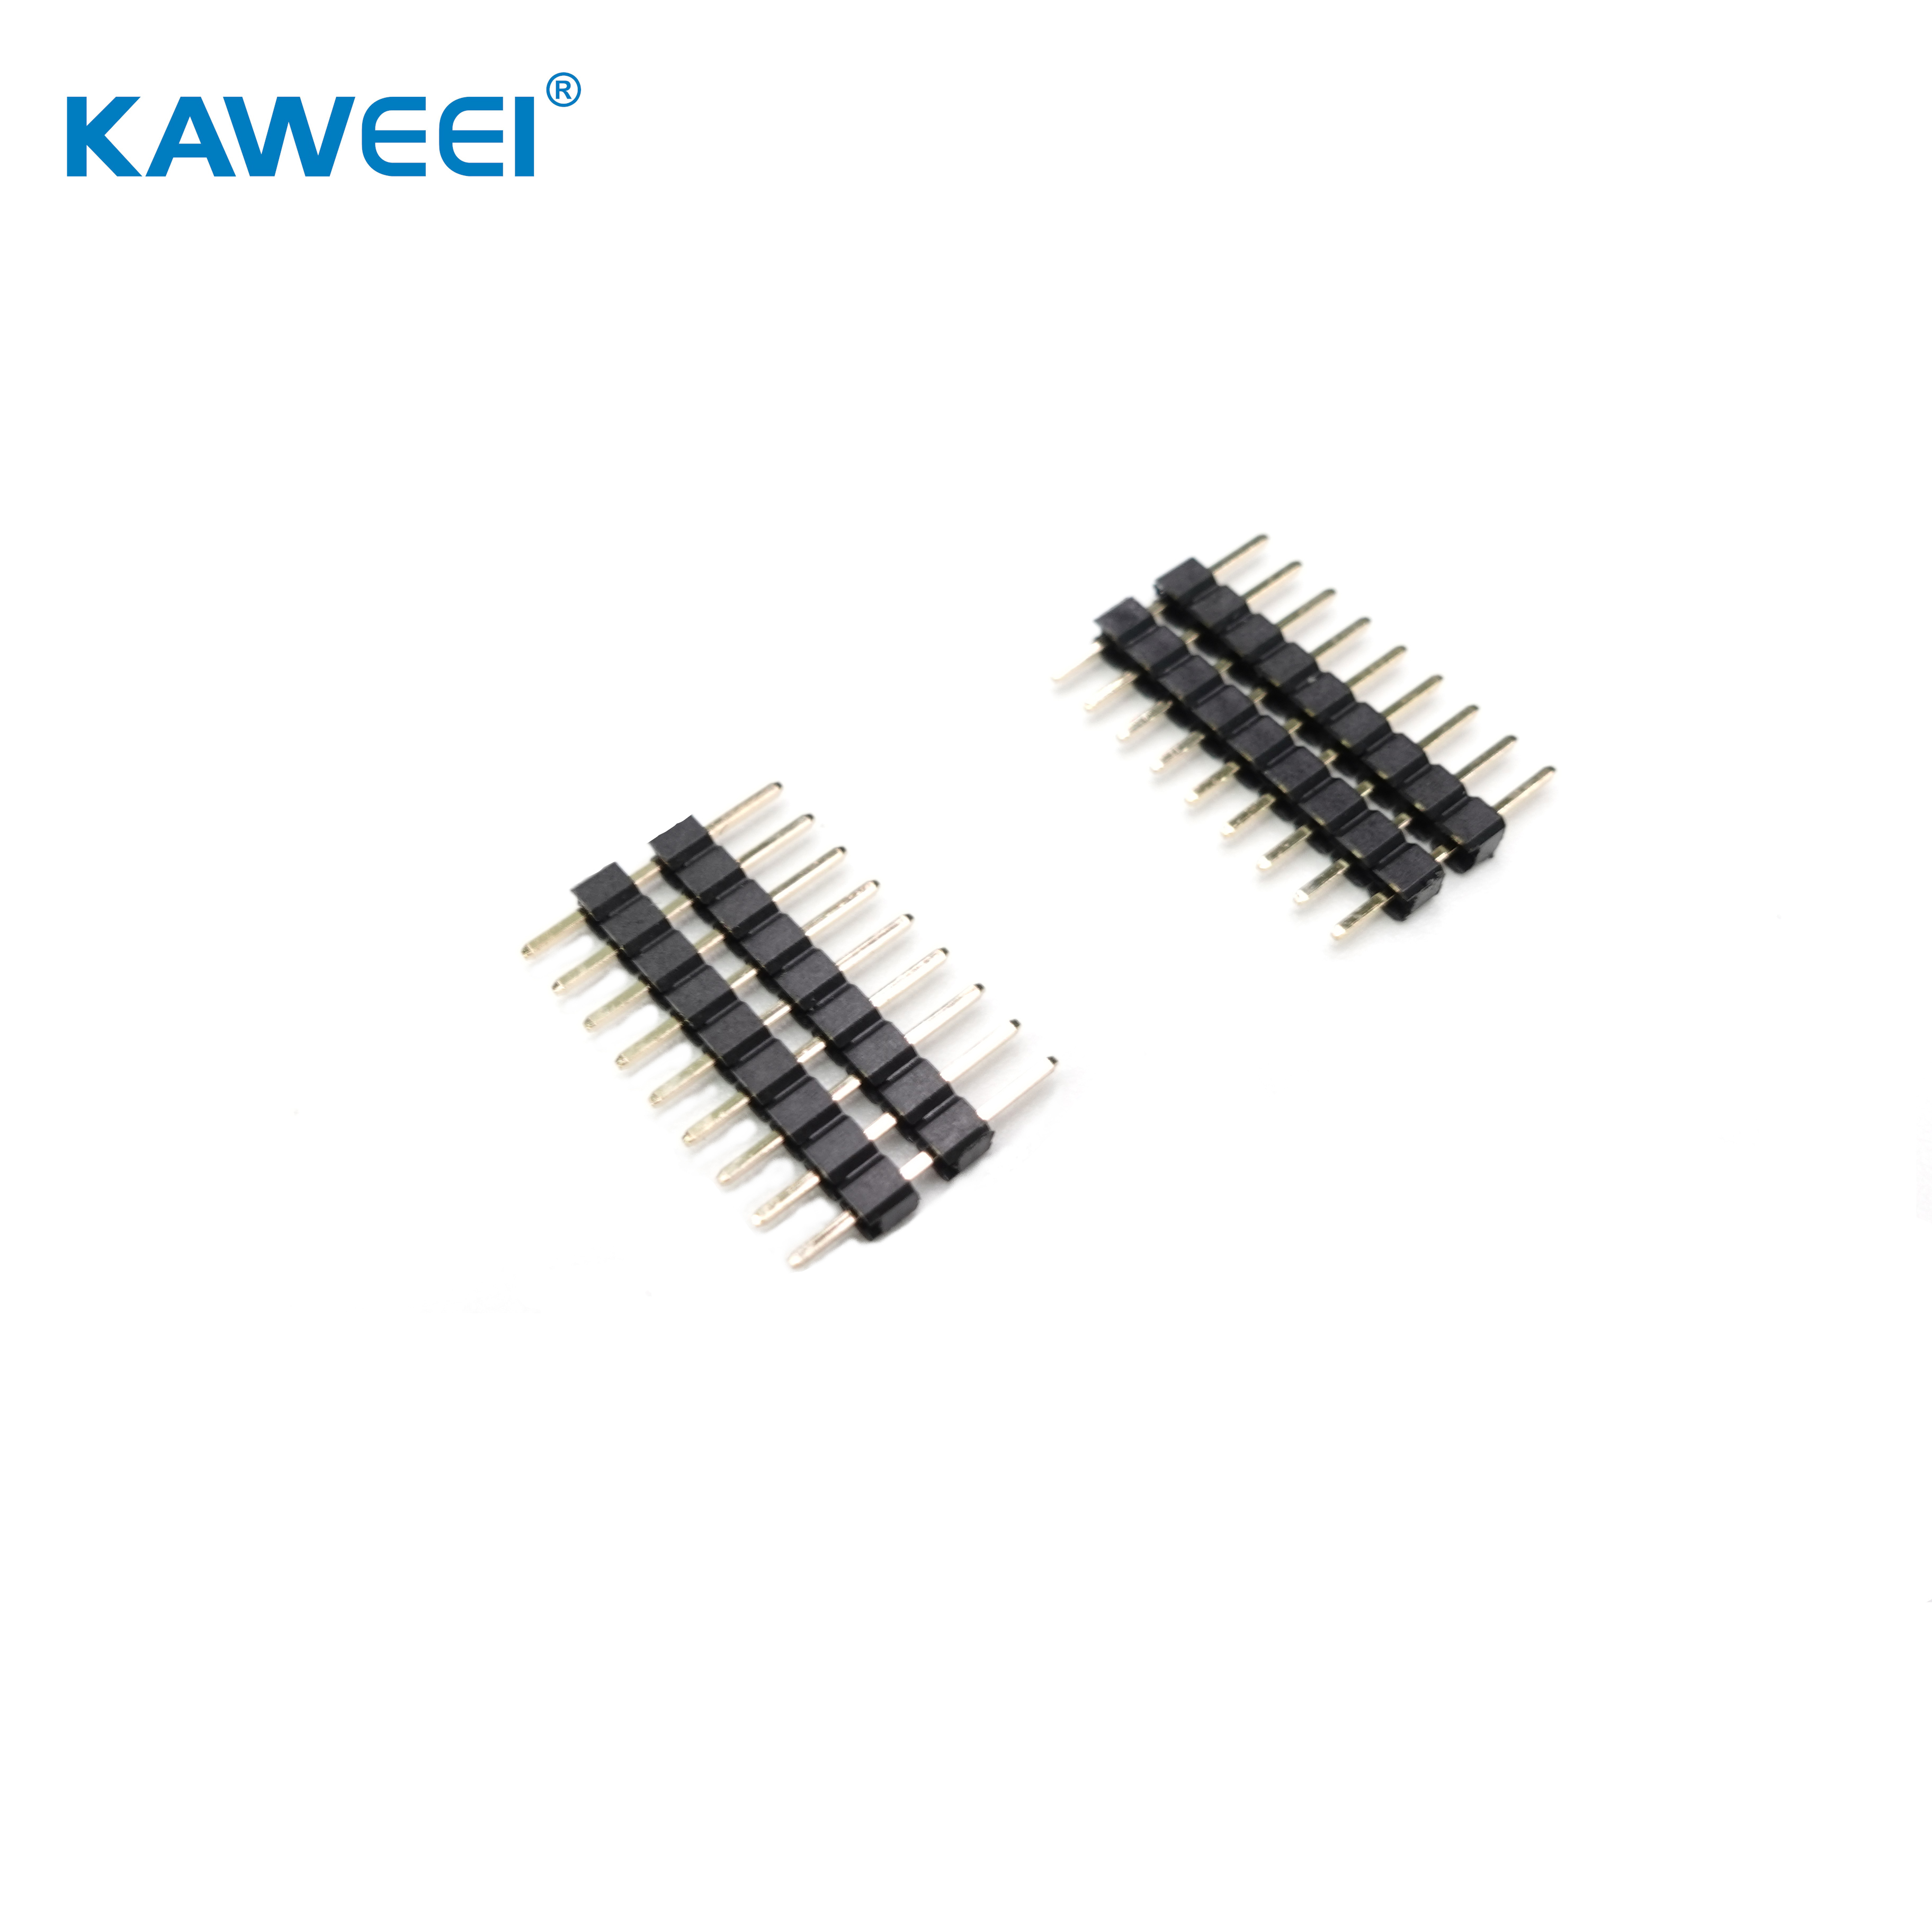 2.54mm pitch pin header straight type board to board connector PCB connector